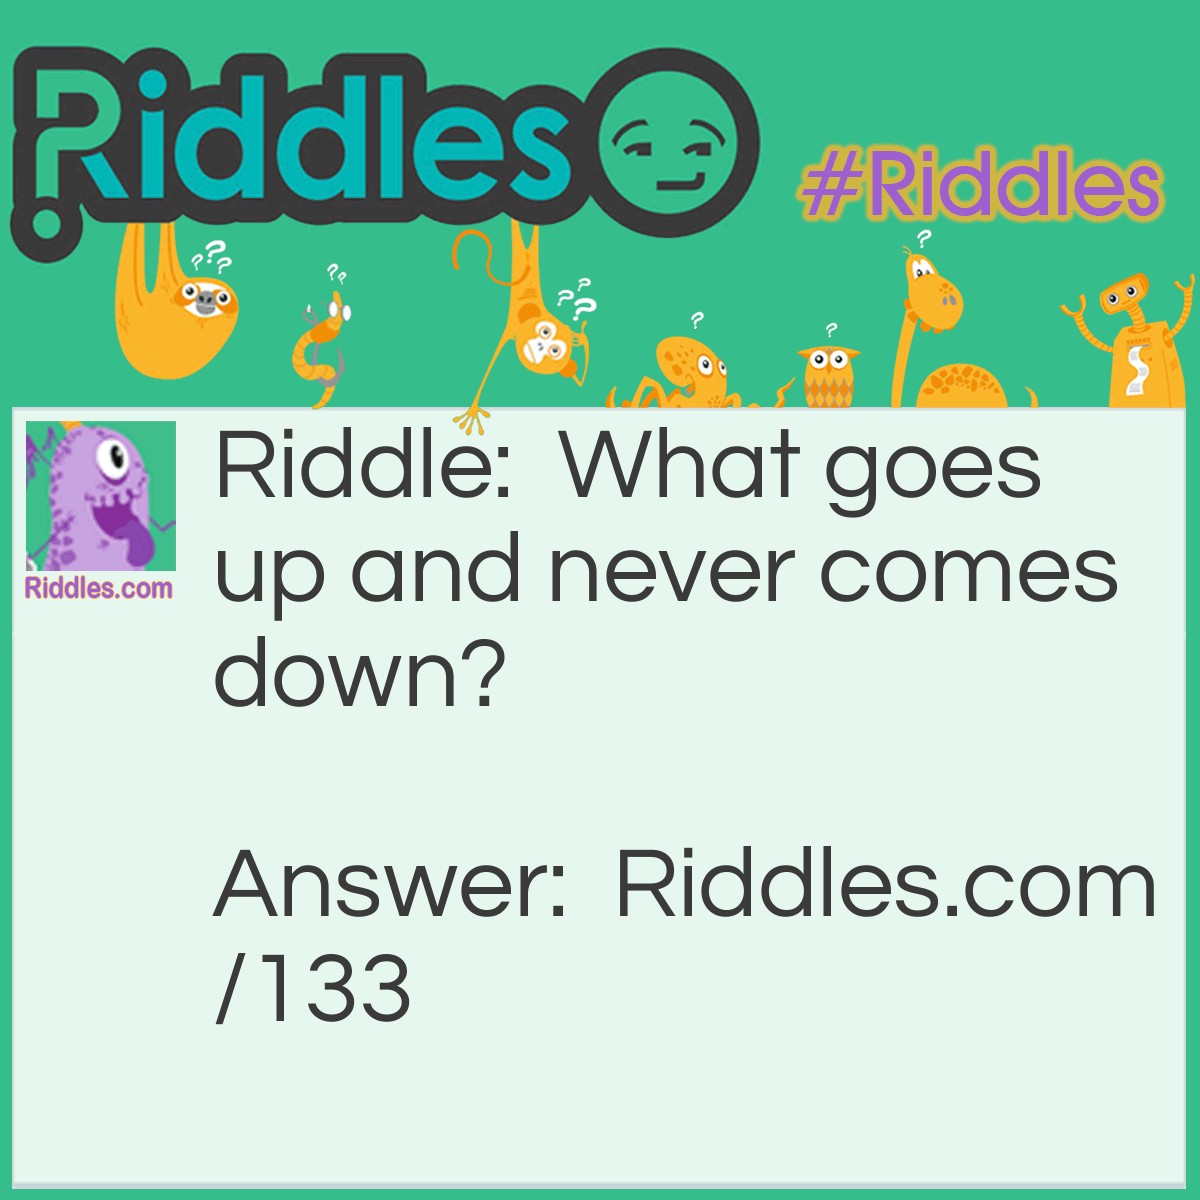 Riddle: What goes up and never comes down? Answer: Your Age.